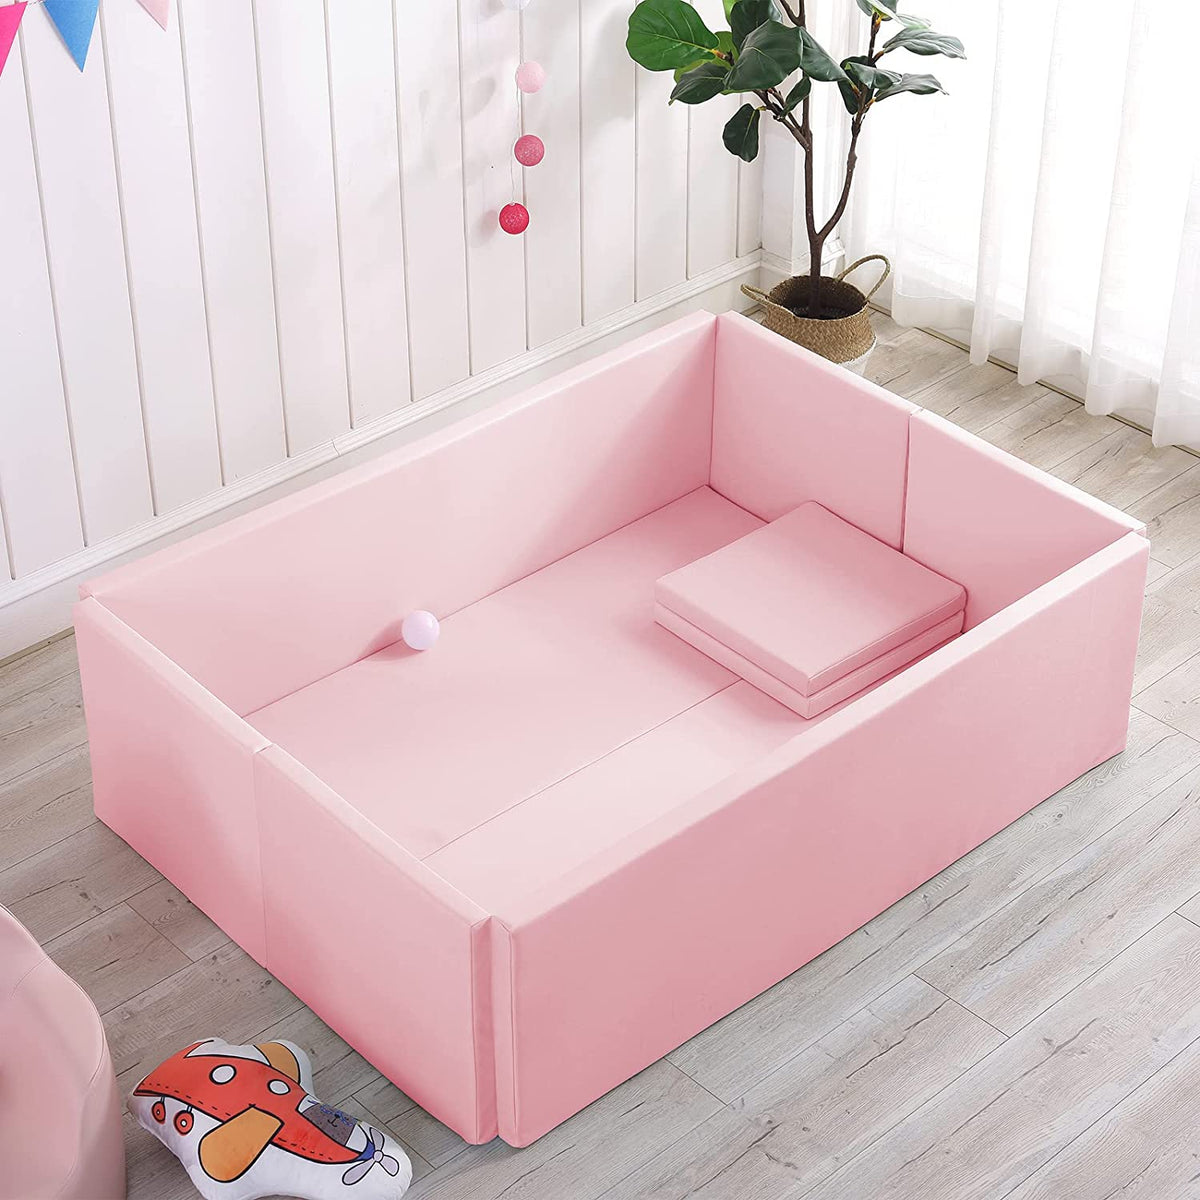 Soft Foam Foldable Pink Ball Pit Crawling Fence Children's Playground-ChandeliersDecor